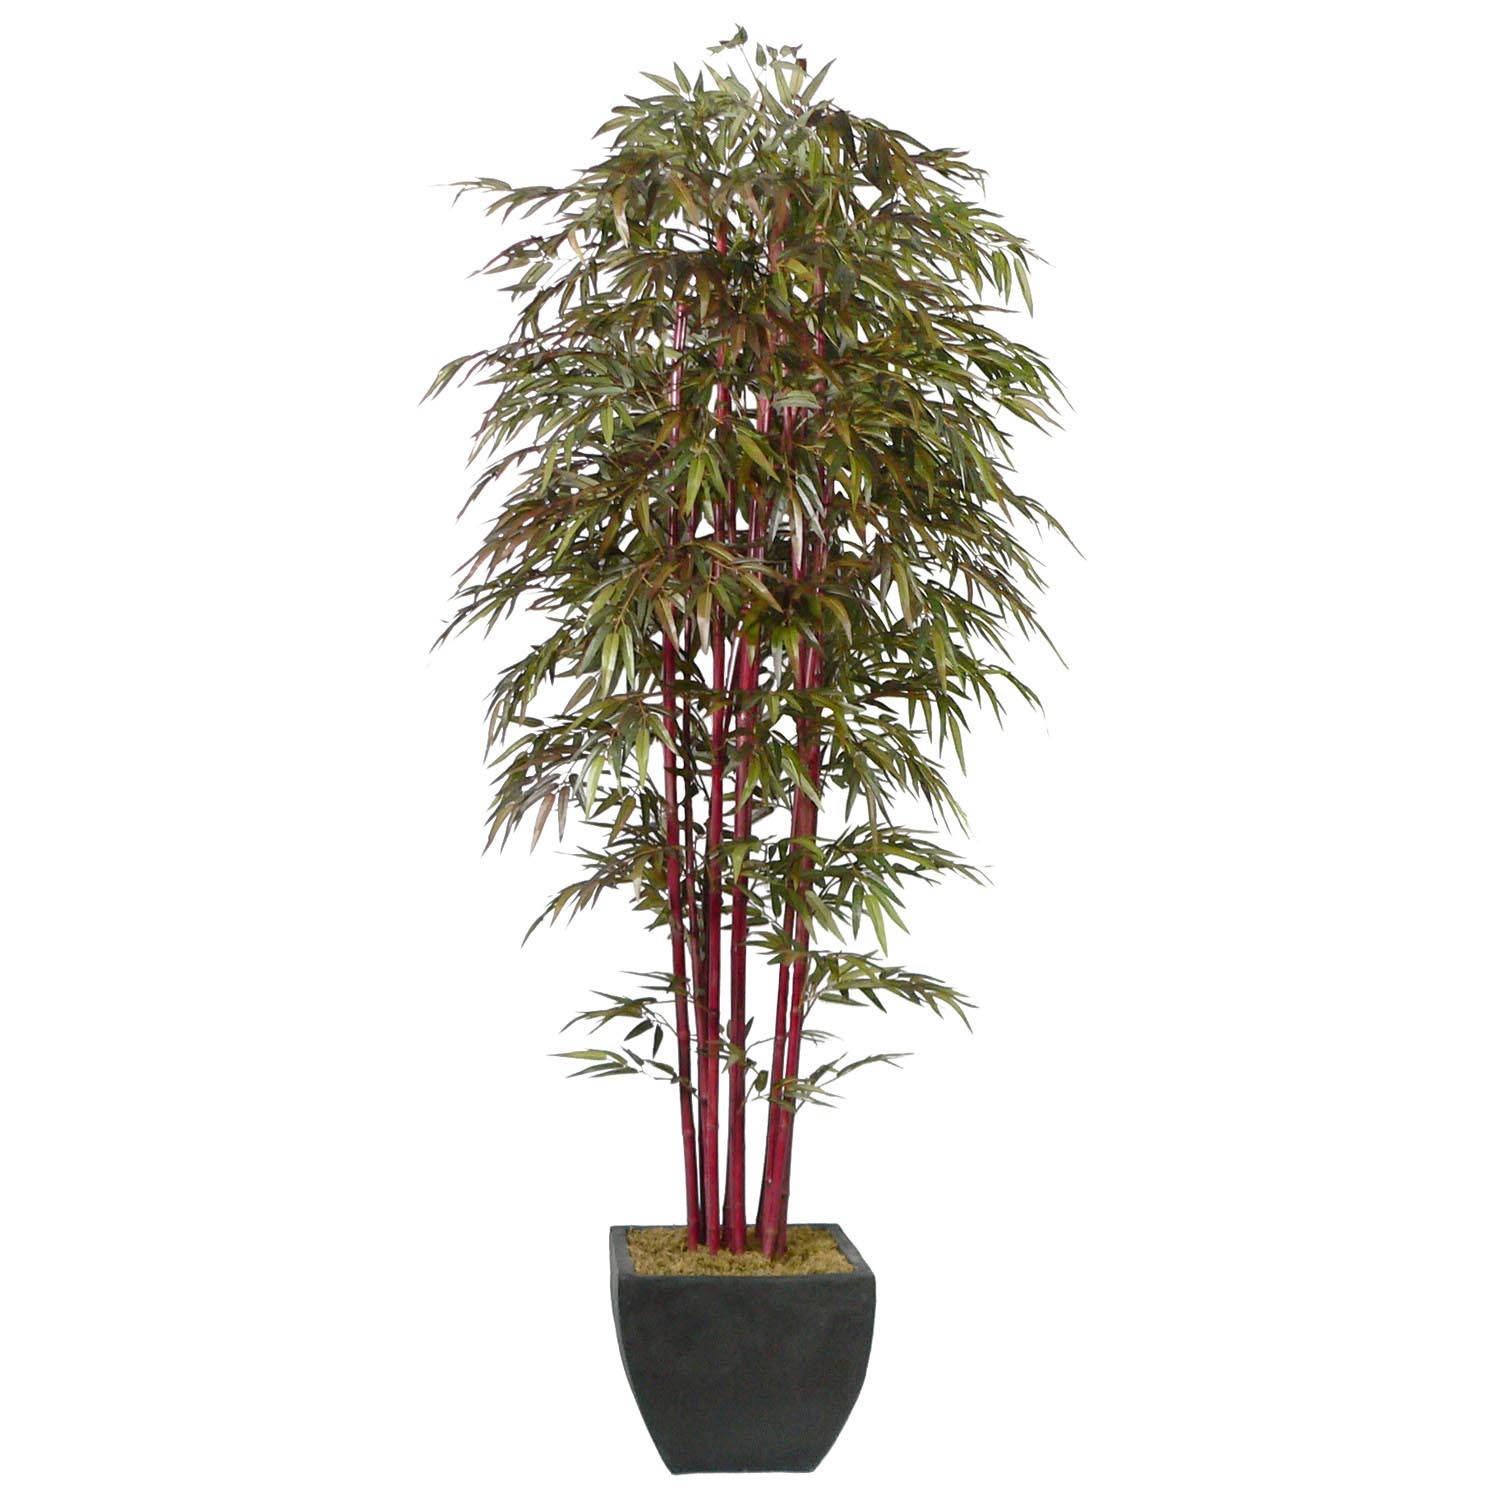 Laura Ashley 8 Foot Artificial Bamboo Tree In Decorative Planter